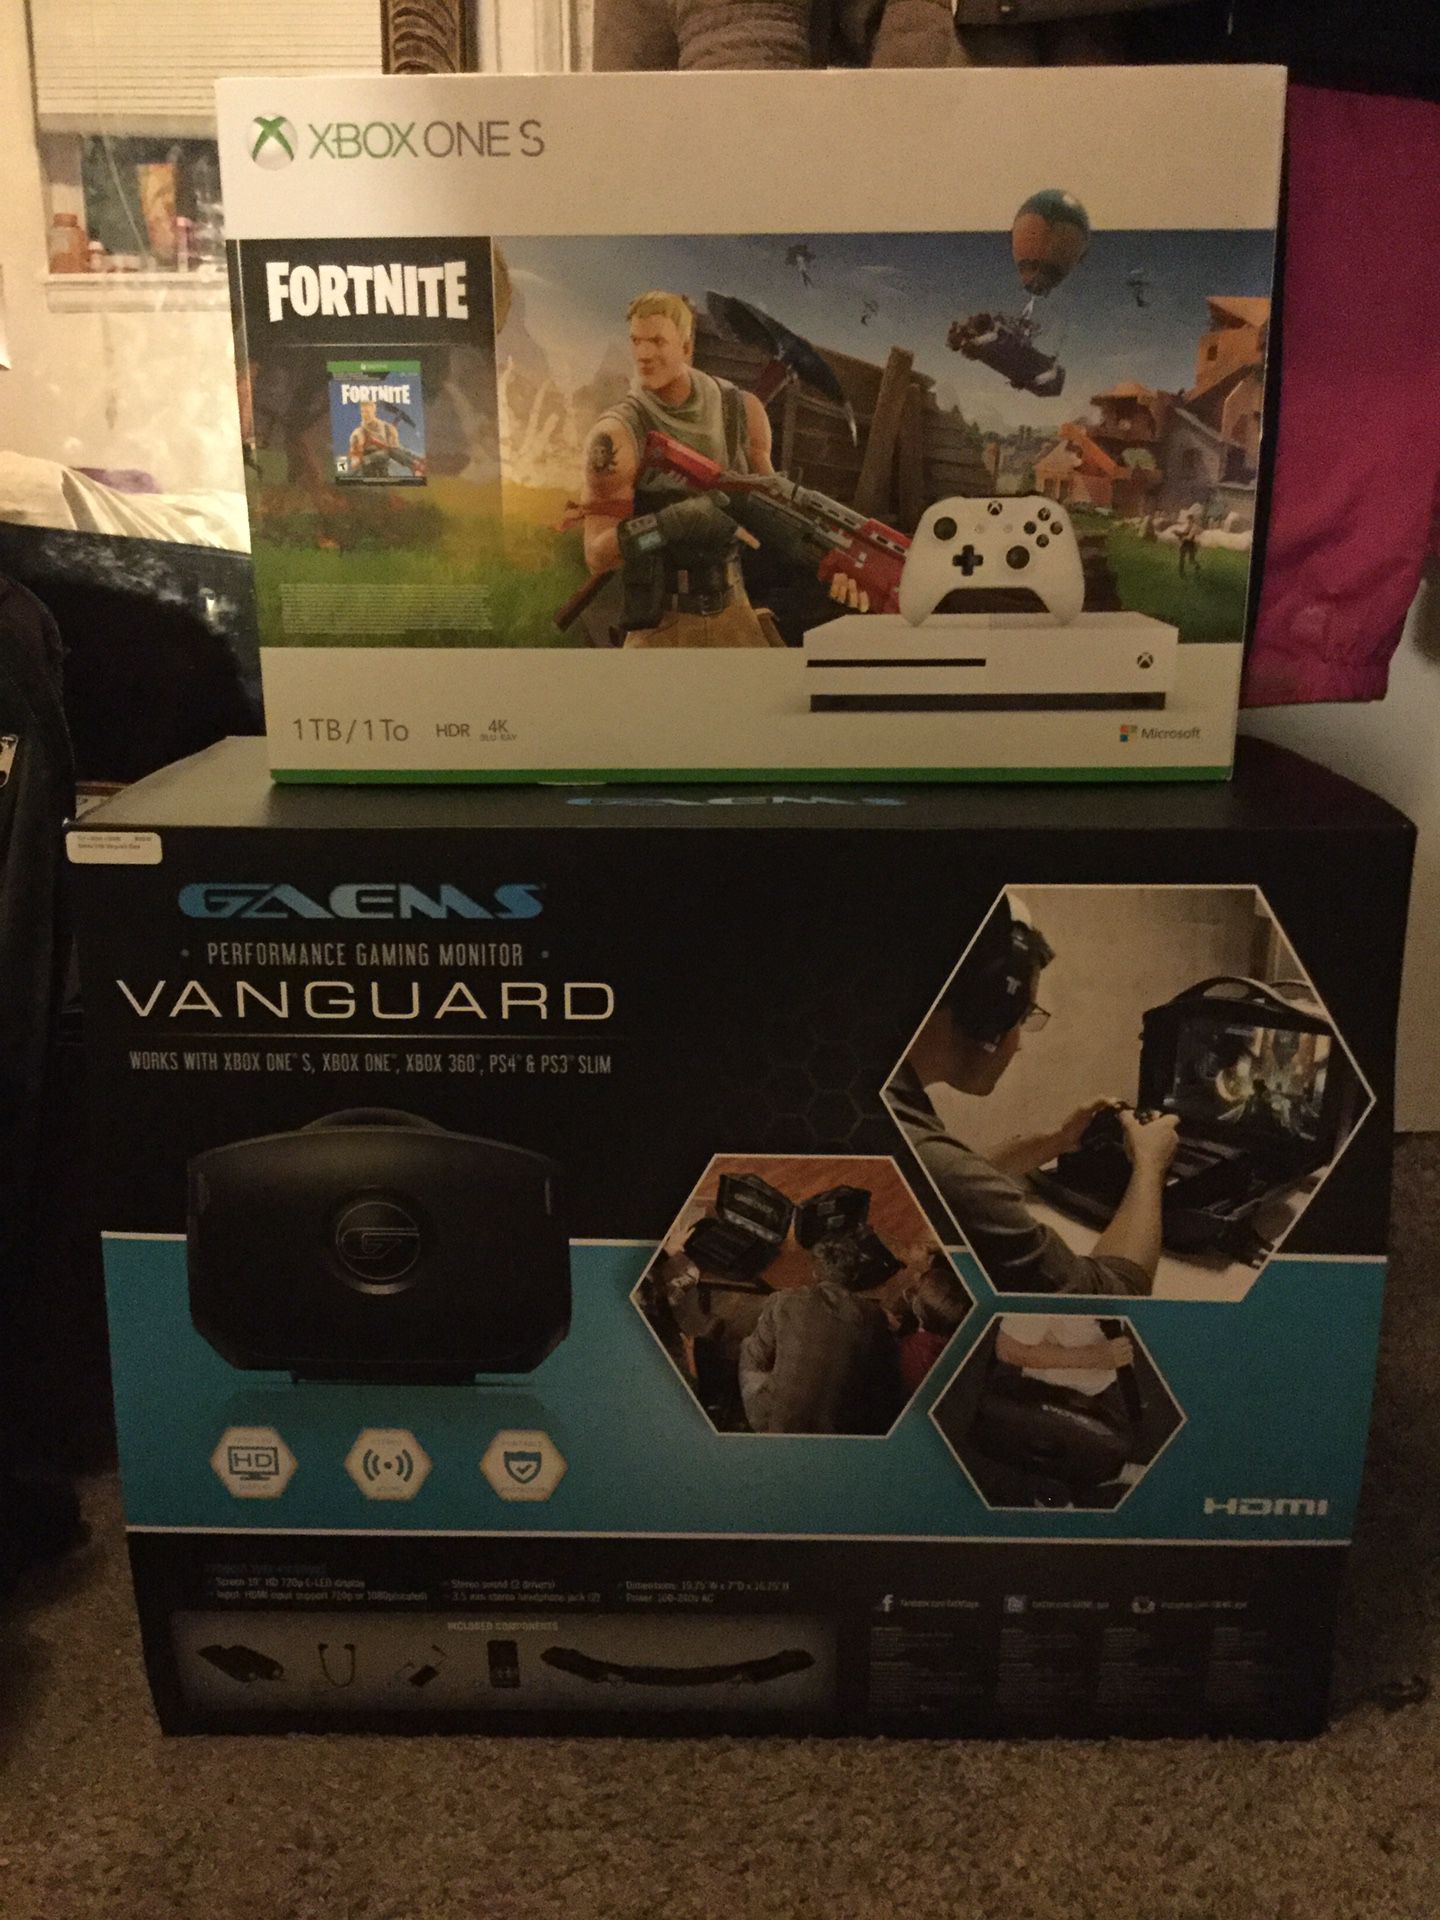 Xbox one s 1 TB “Fortnight” edition with Gaems 19inch Vanguard Monitor